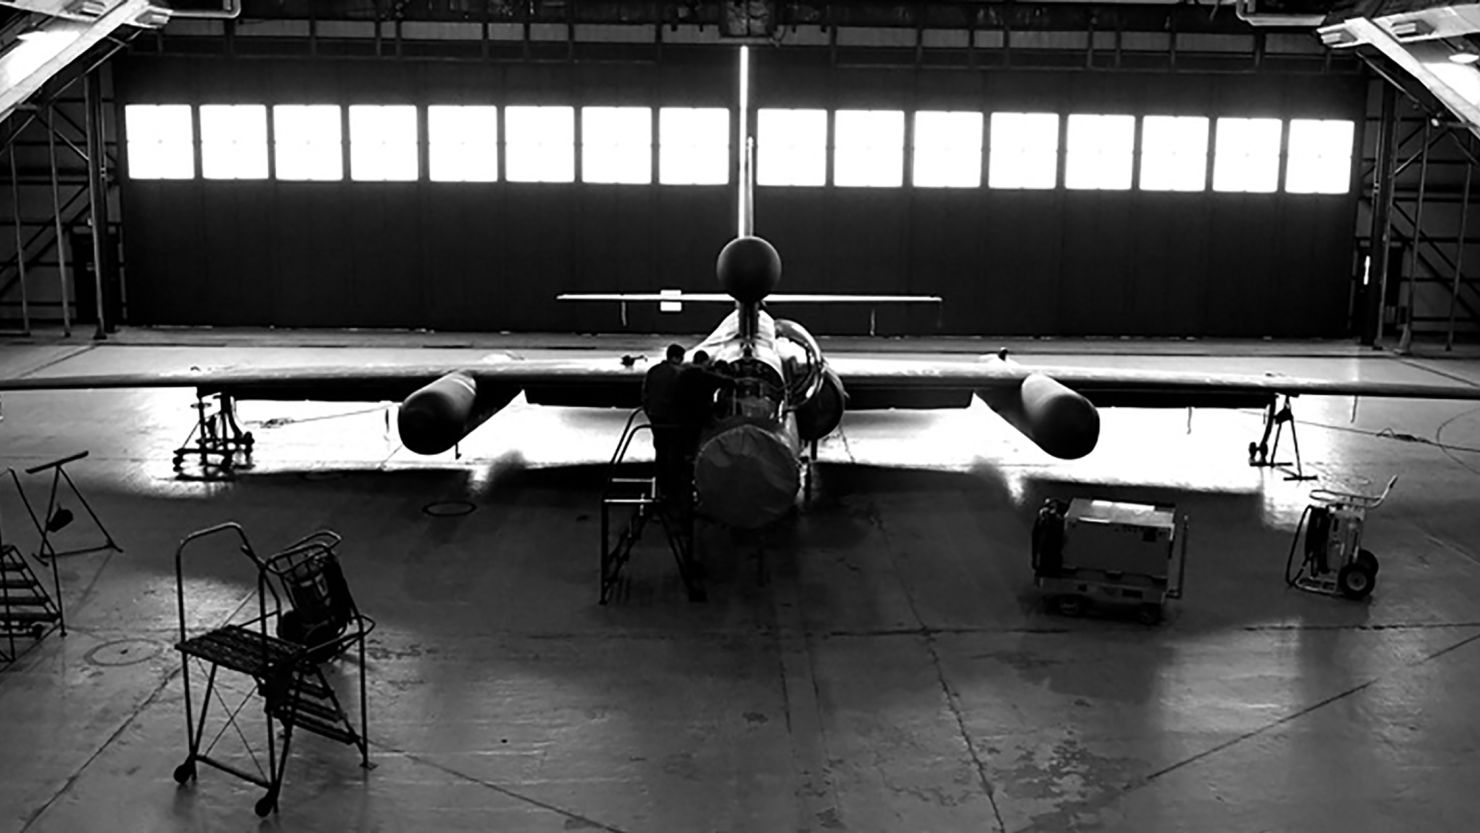 HISTORIC FIGHTER PLANES IN THE CLOUDS, Landscapes, Black & White